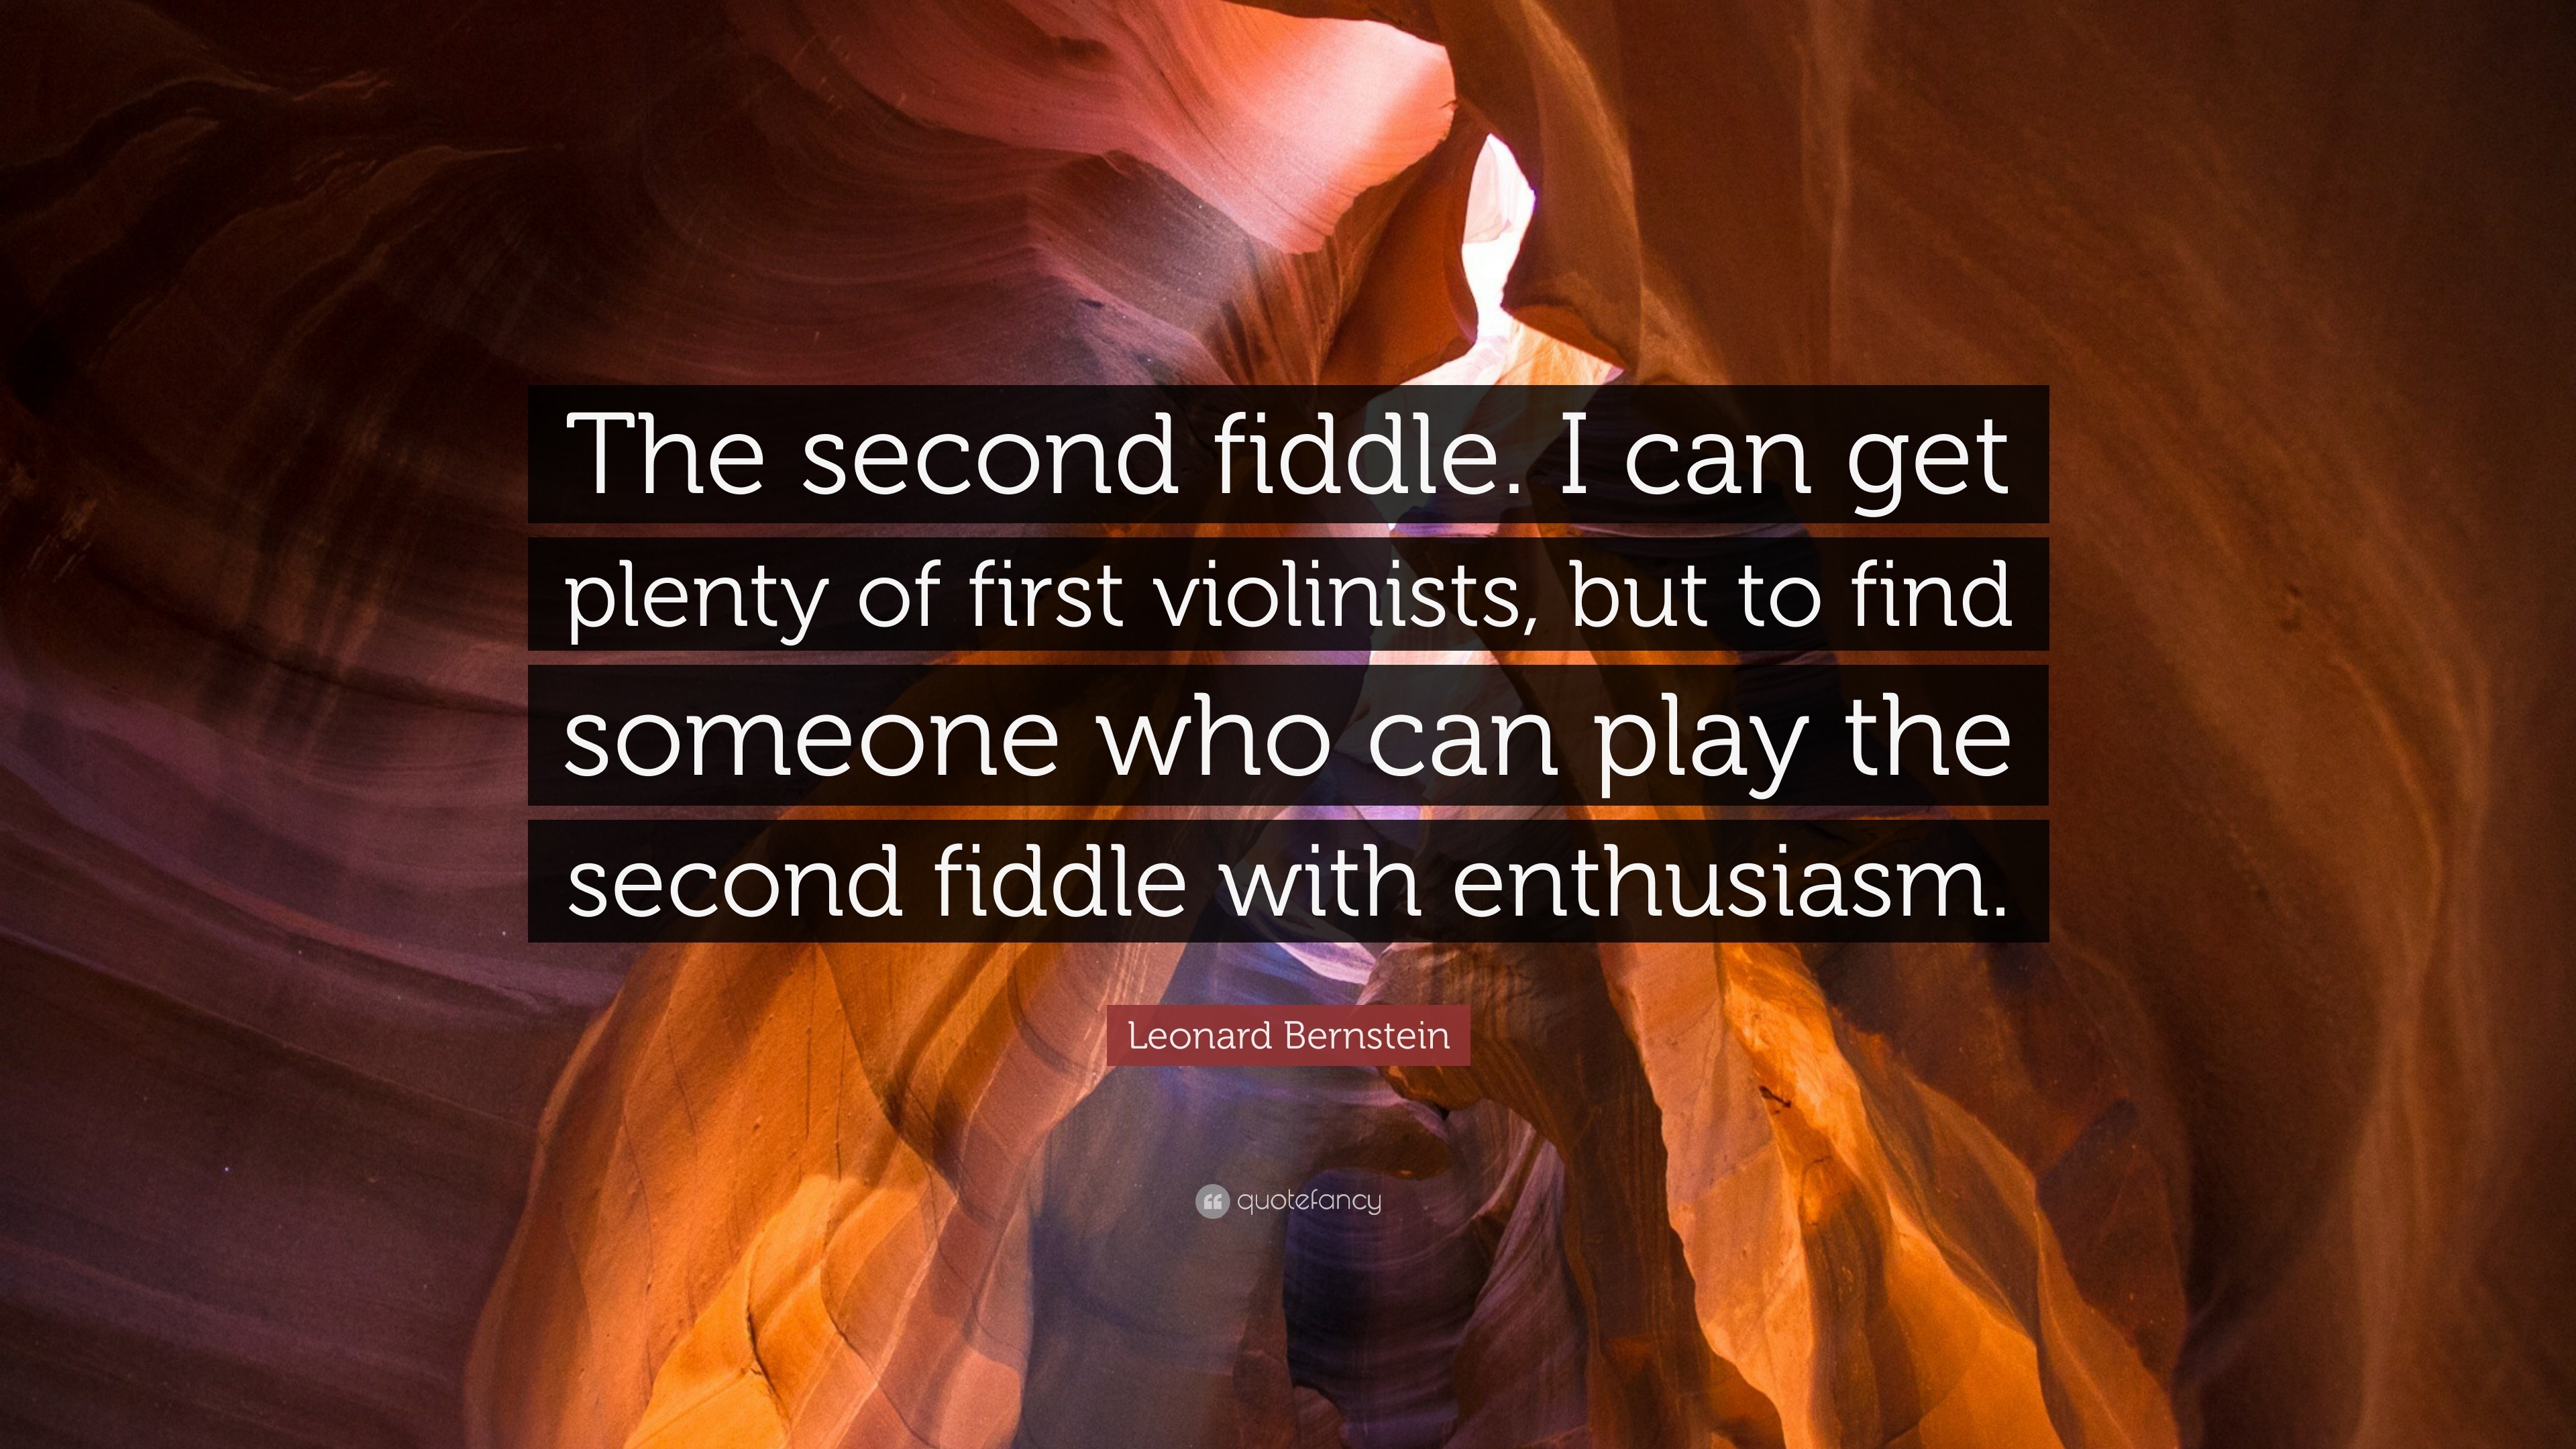 Leonard Bernstein Quote: “The second fiddle. I can get plenty of first